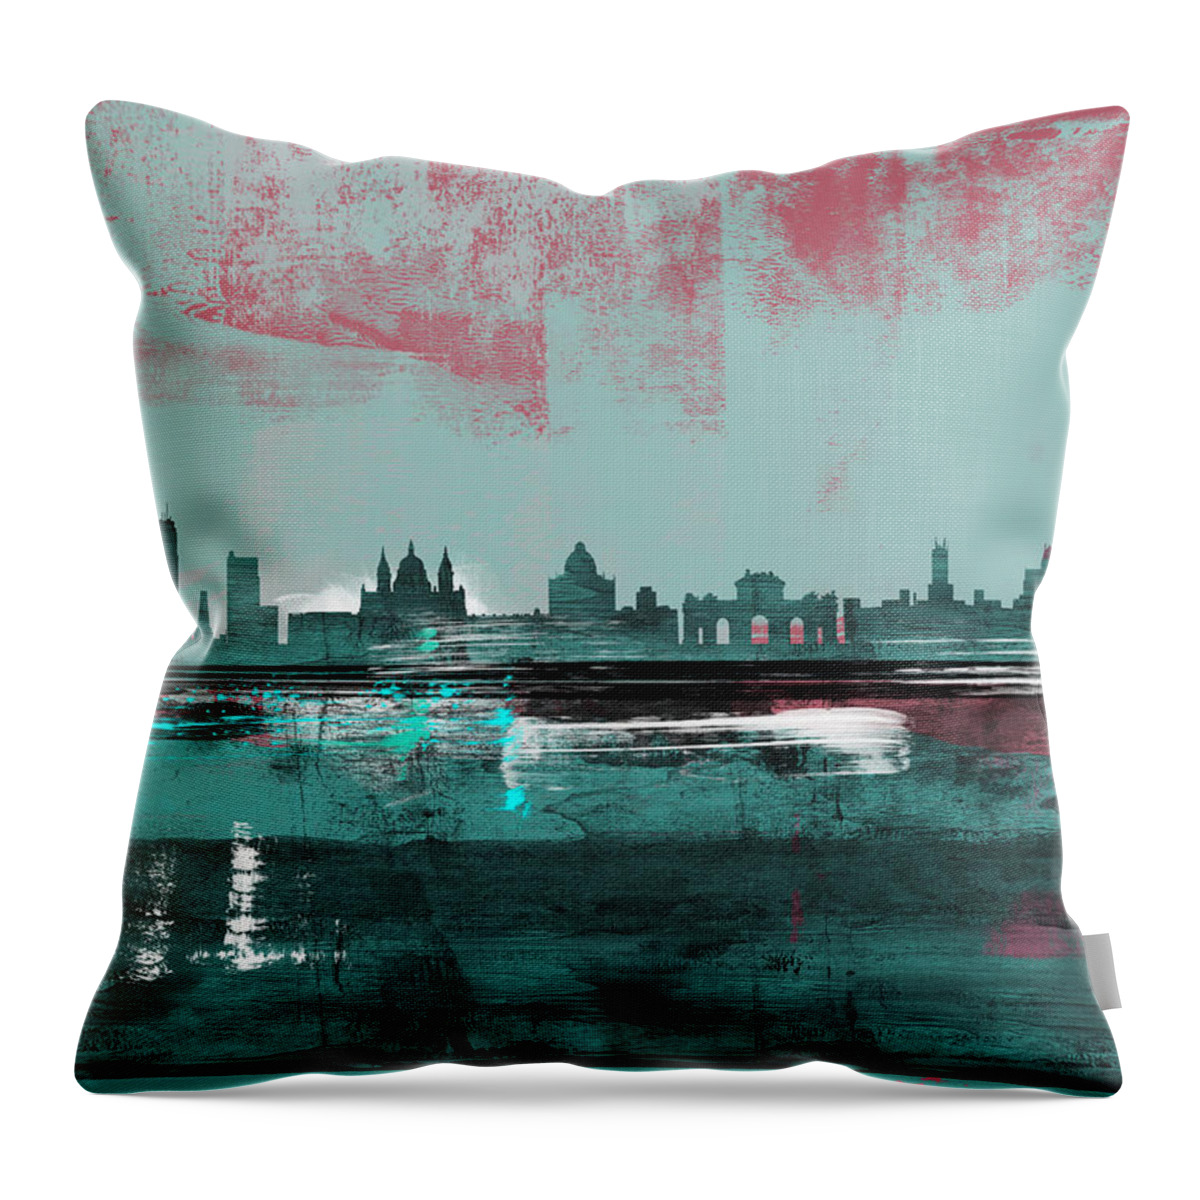 Madrid Throw Pillow featuring the mixed media Madrid Abstract Skyline by Naxart Studio